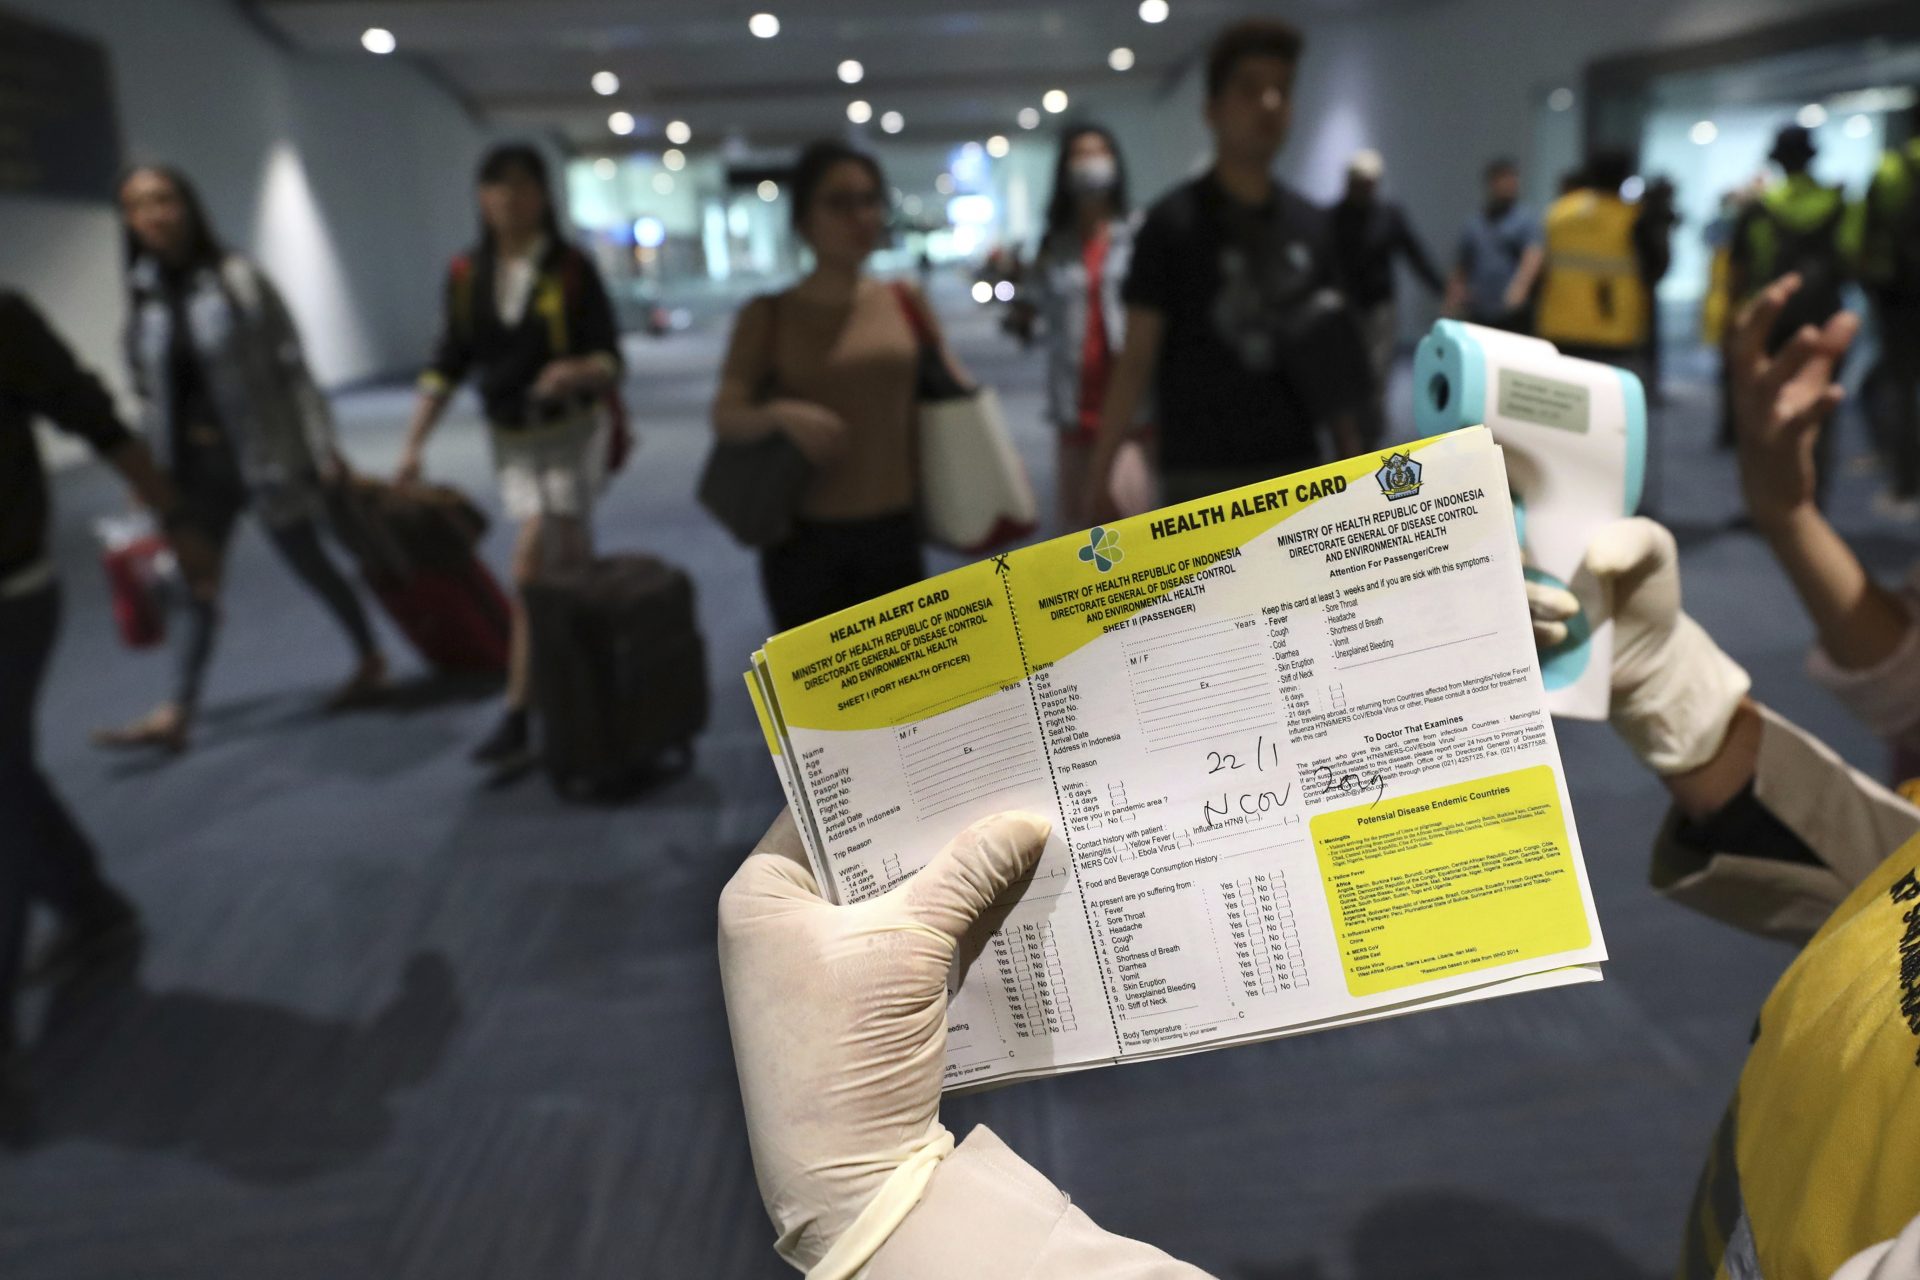 A health official holds a health alert card at the Soekarno-Hatta International Airport in Tangerang, Indonesia, Wednesday, Jan. 22, 2020. Indonesia is screening travelers from overseas for a new type of coronavirus as fears spread about a mysterious infectious disease after its first death reported in China.